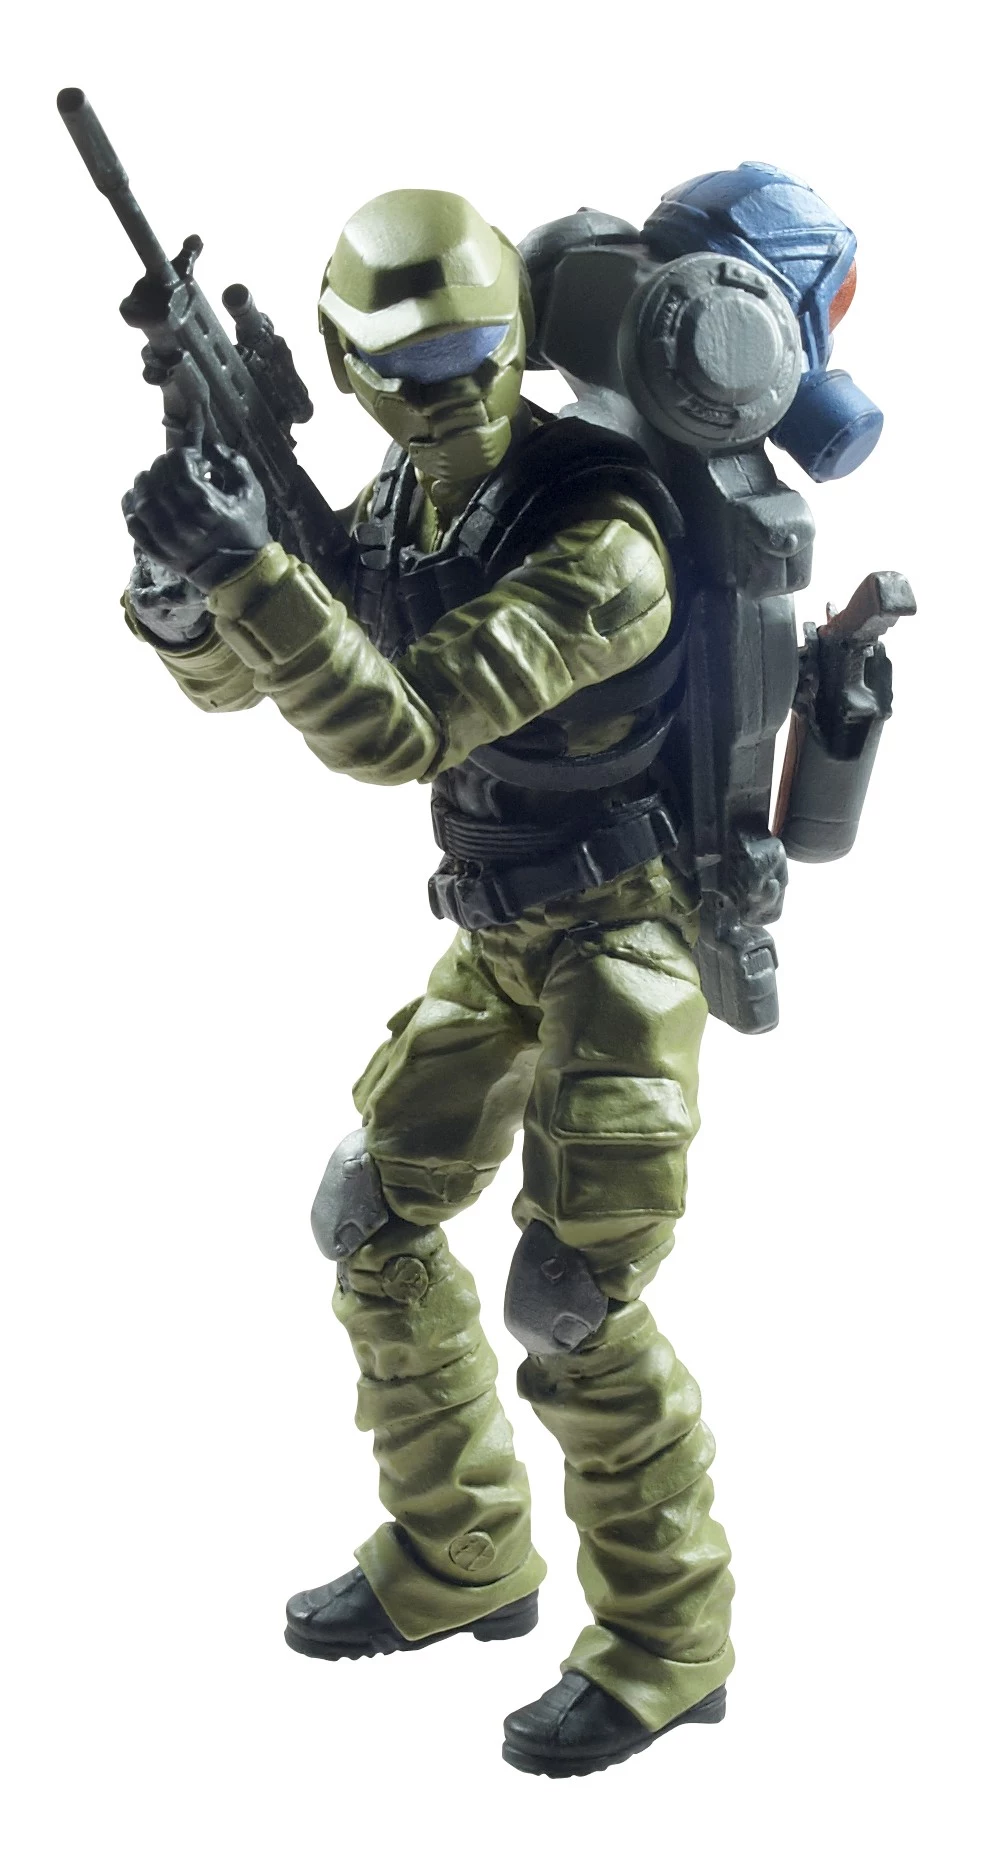 New ‘G.I. Joe: Retaliation’ Toy Images Roll Out [Toy Fair 2012]